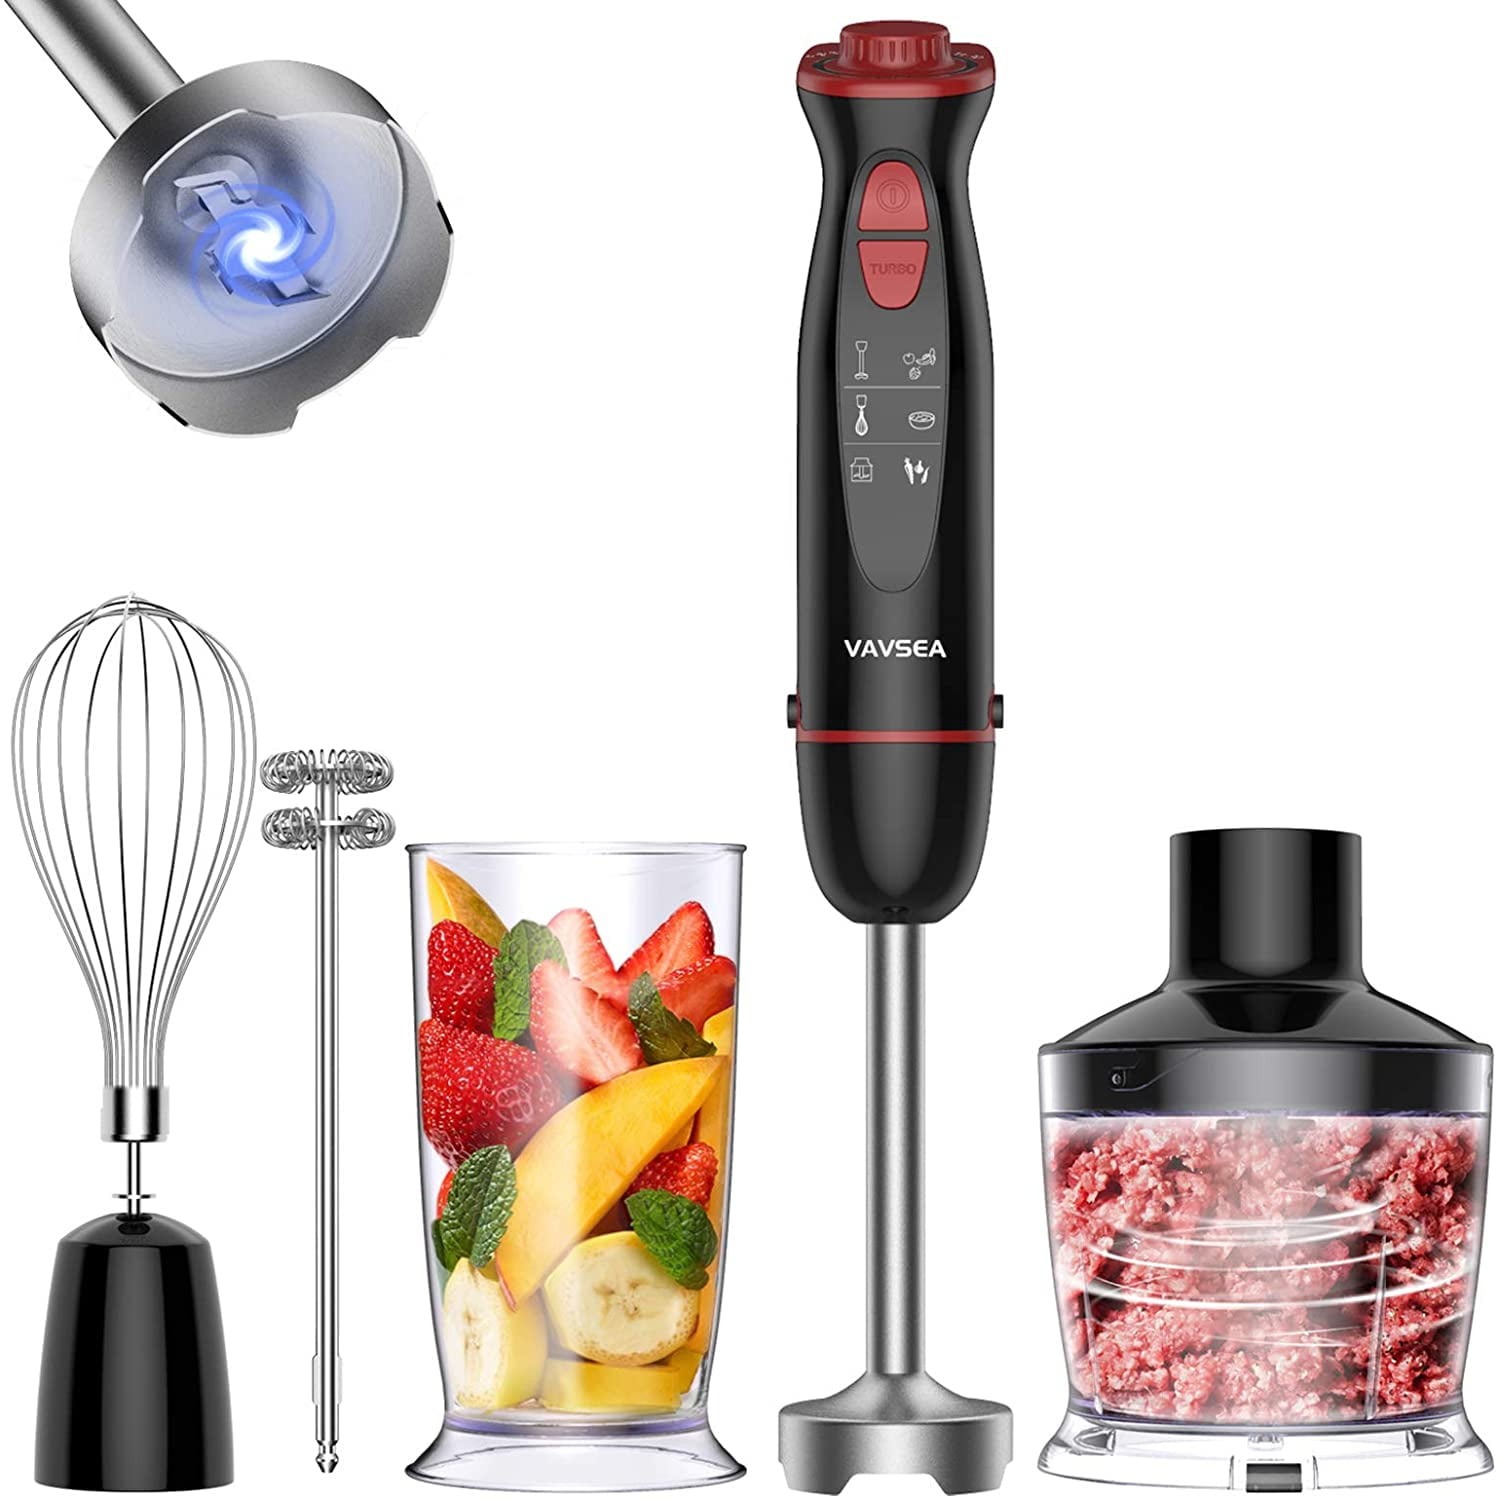 Milk Frother BPA-Free VAVSEA 1000W 5-in-1 Multi-Function Immersion Hand Blender 12-Speed Stick Blender with 500ml Chopping Bowl 600ml Beaker for Puree Infant Food/Smoothies/Soups Egg Whisk 